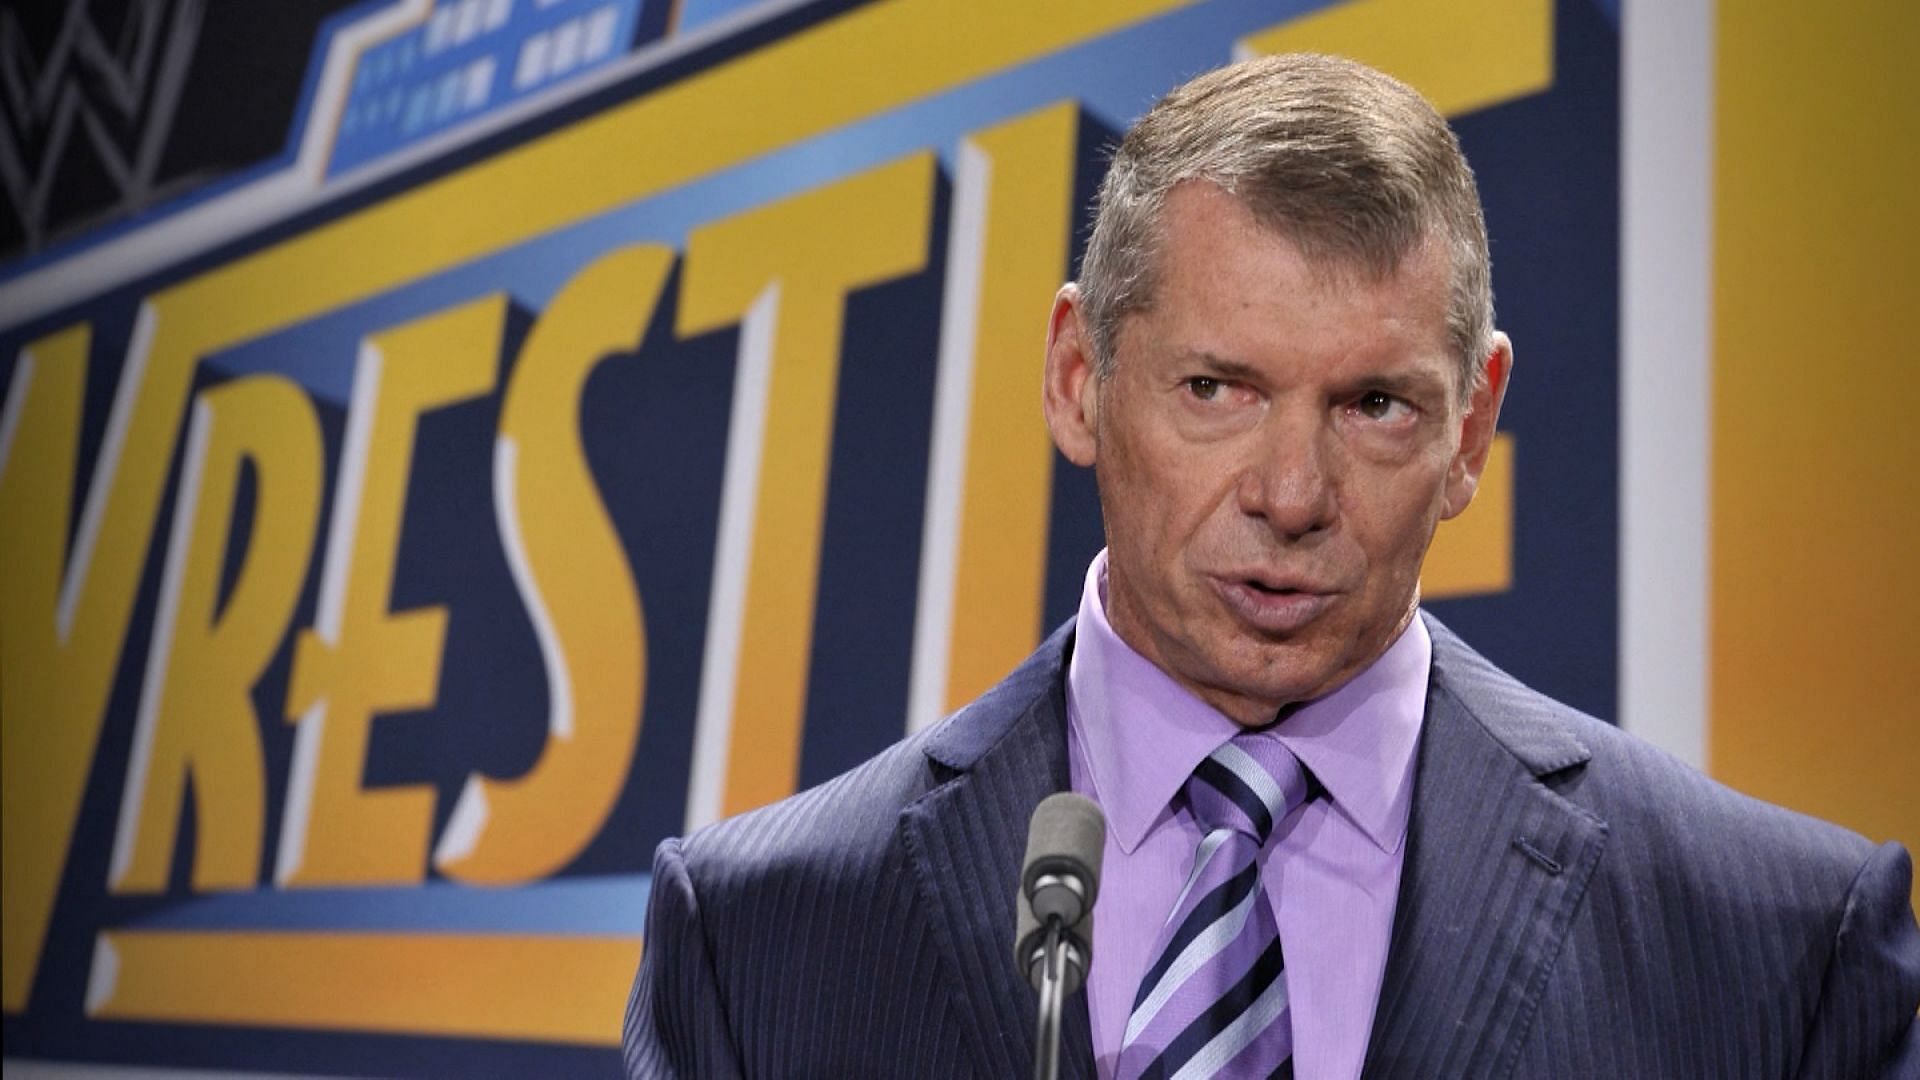 It has been a crazy year for Vince McMahon